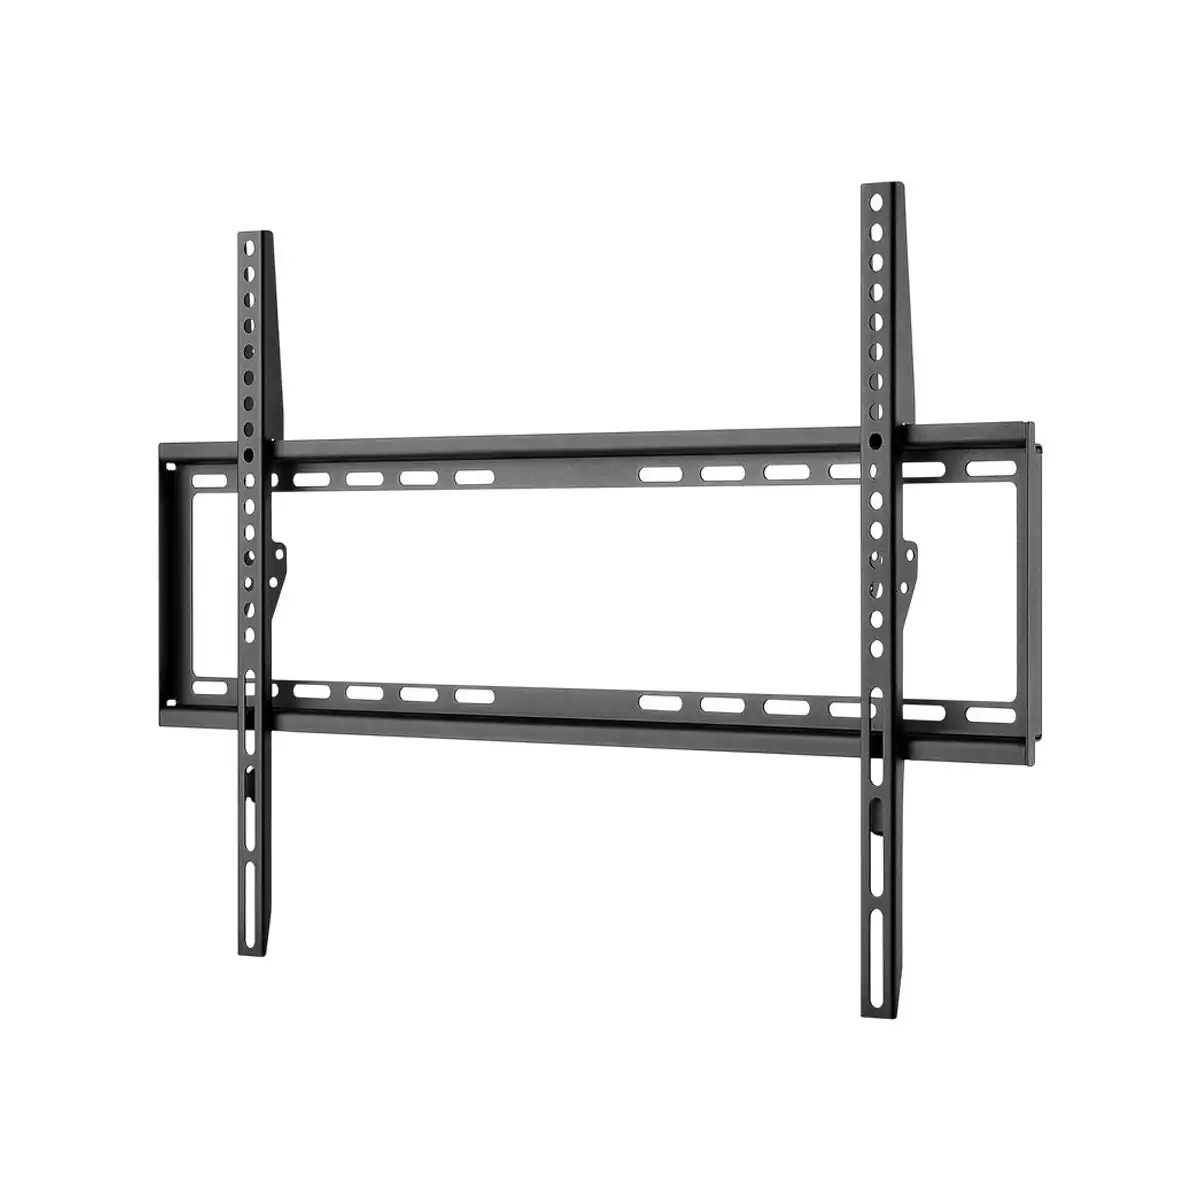 Goobay TV Wall Mount Fixed Position for Large TVs (37-70")